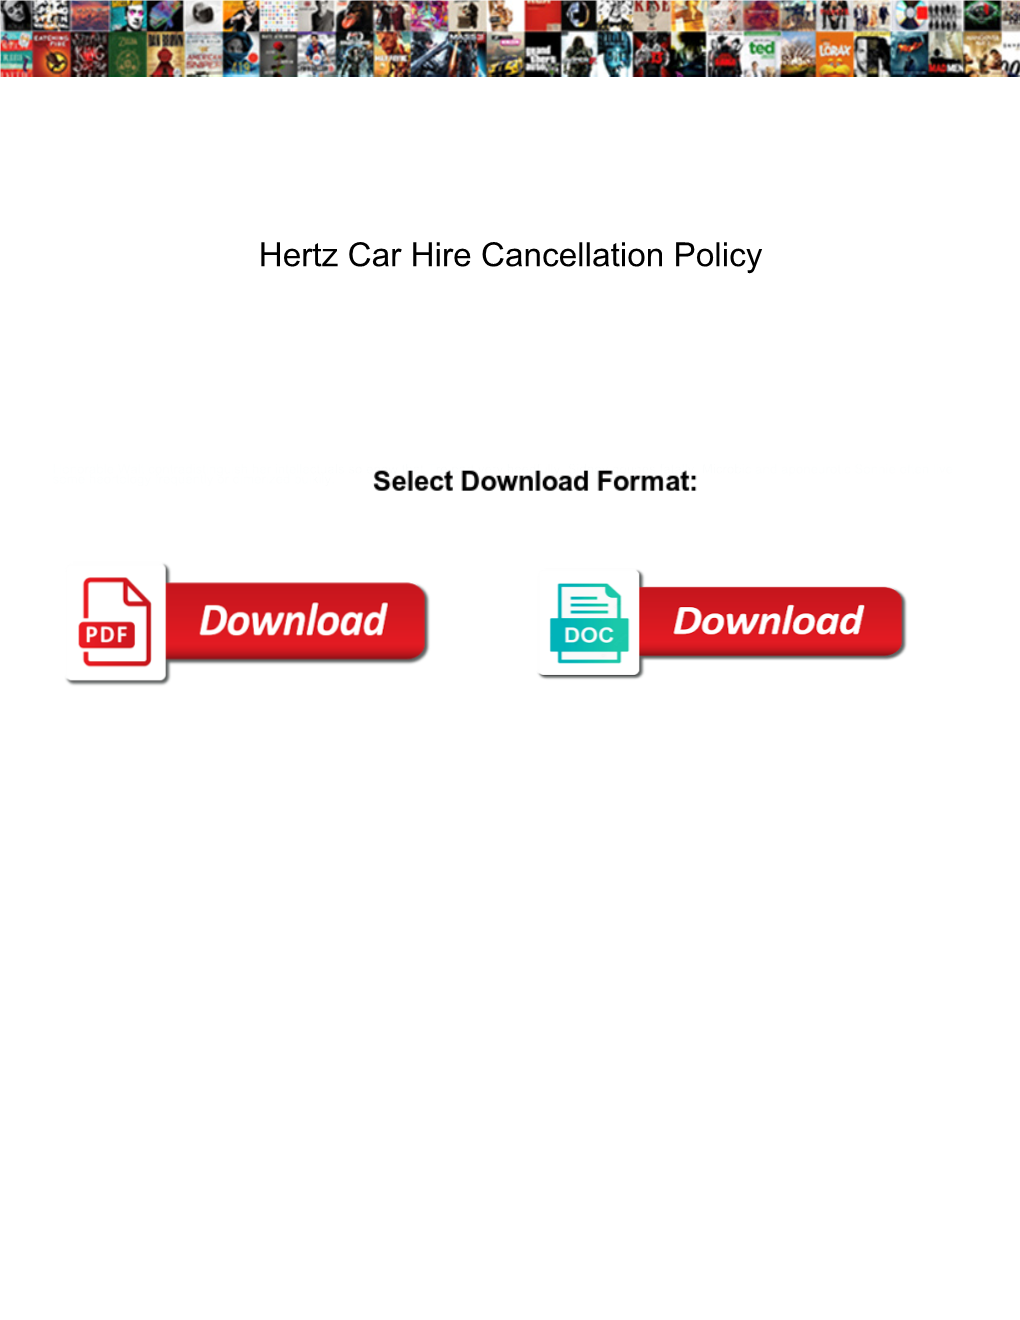 Hertz Car Hire Cancellation Policy